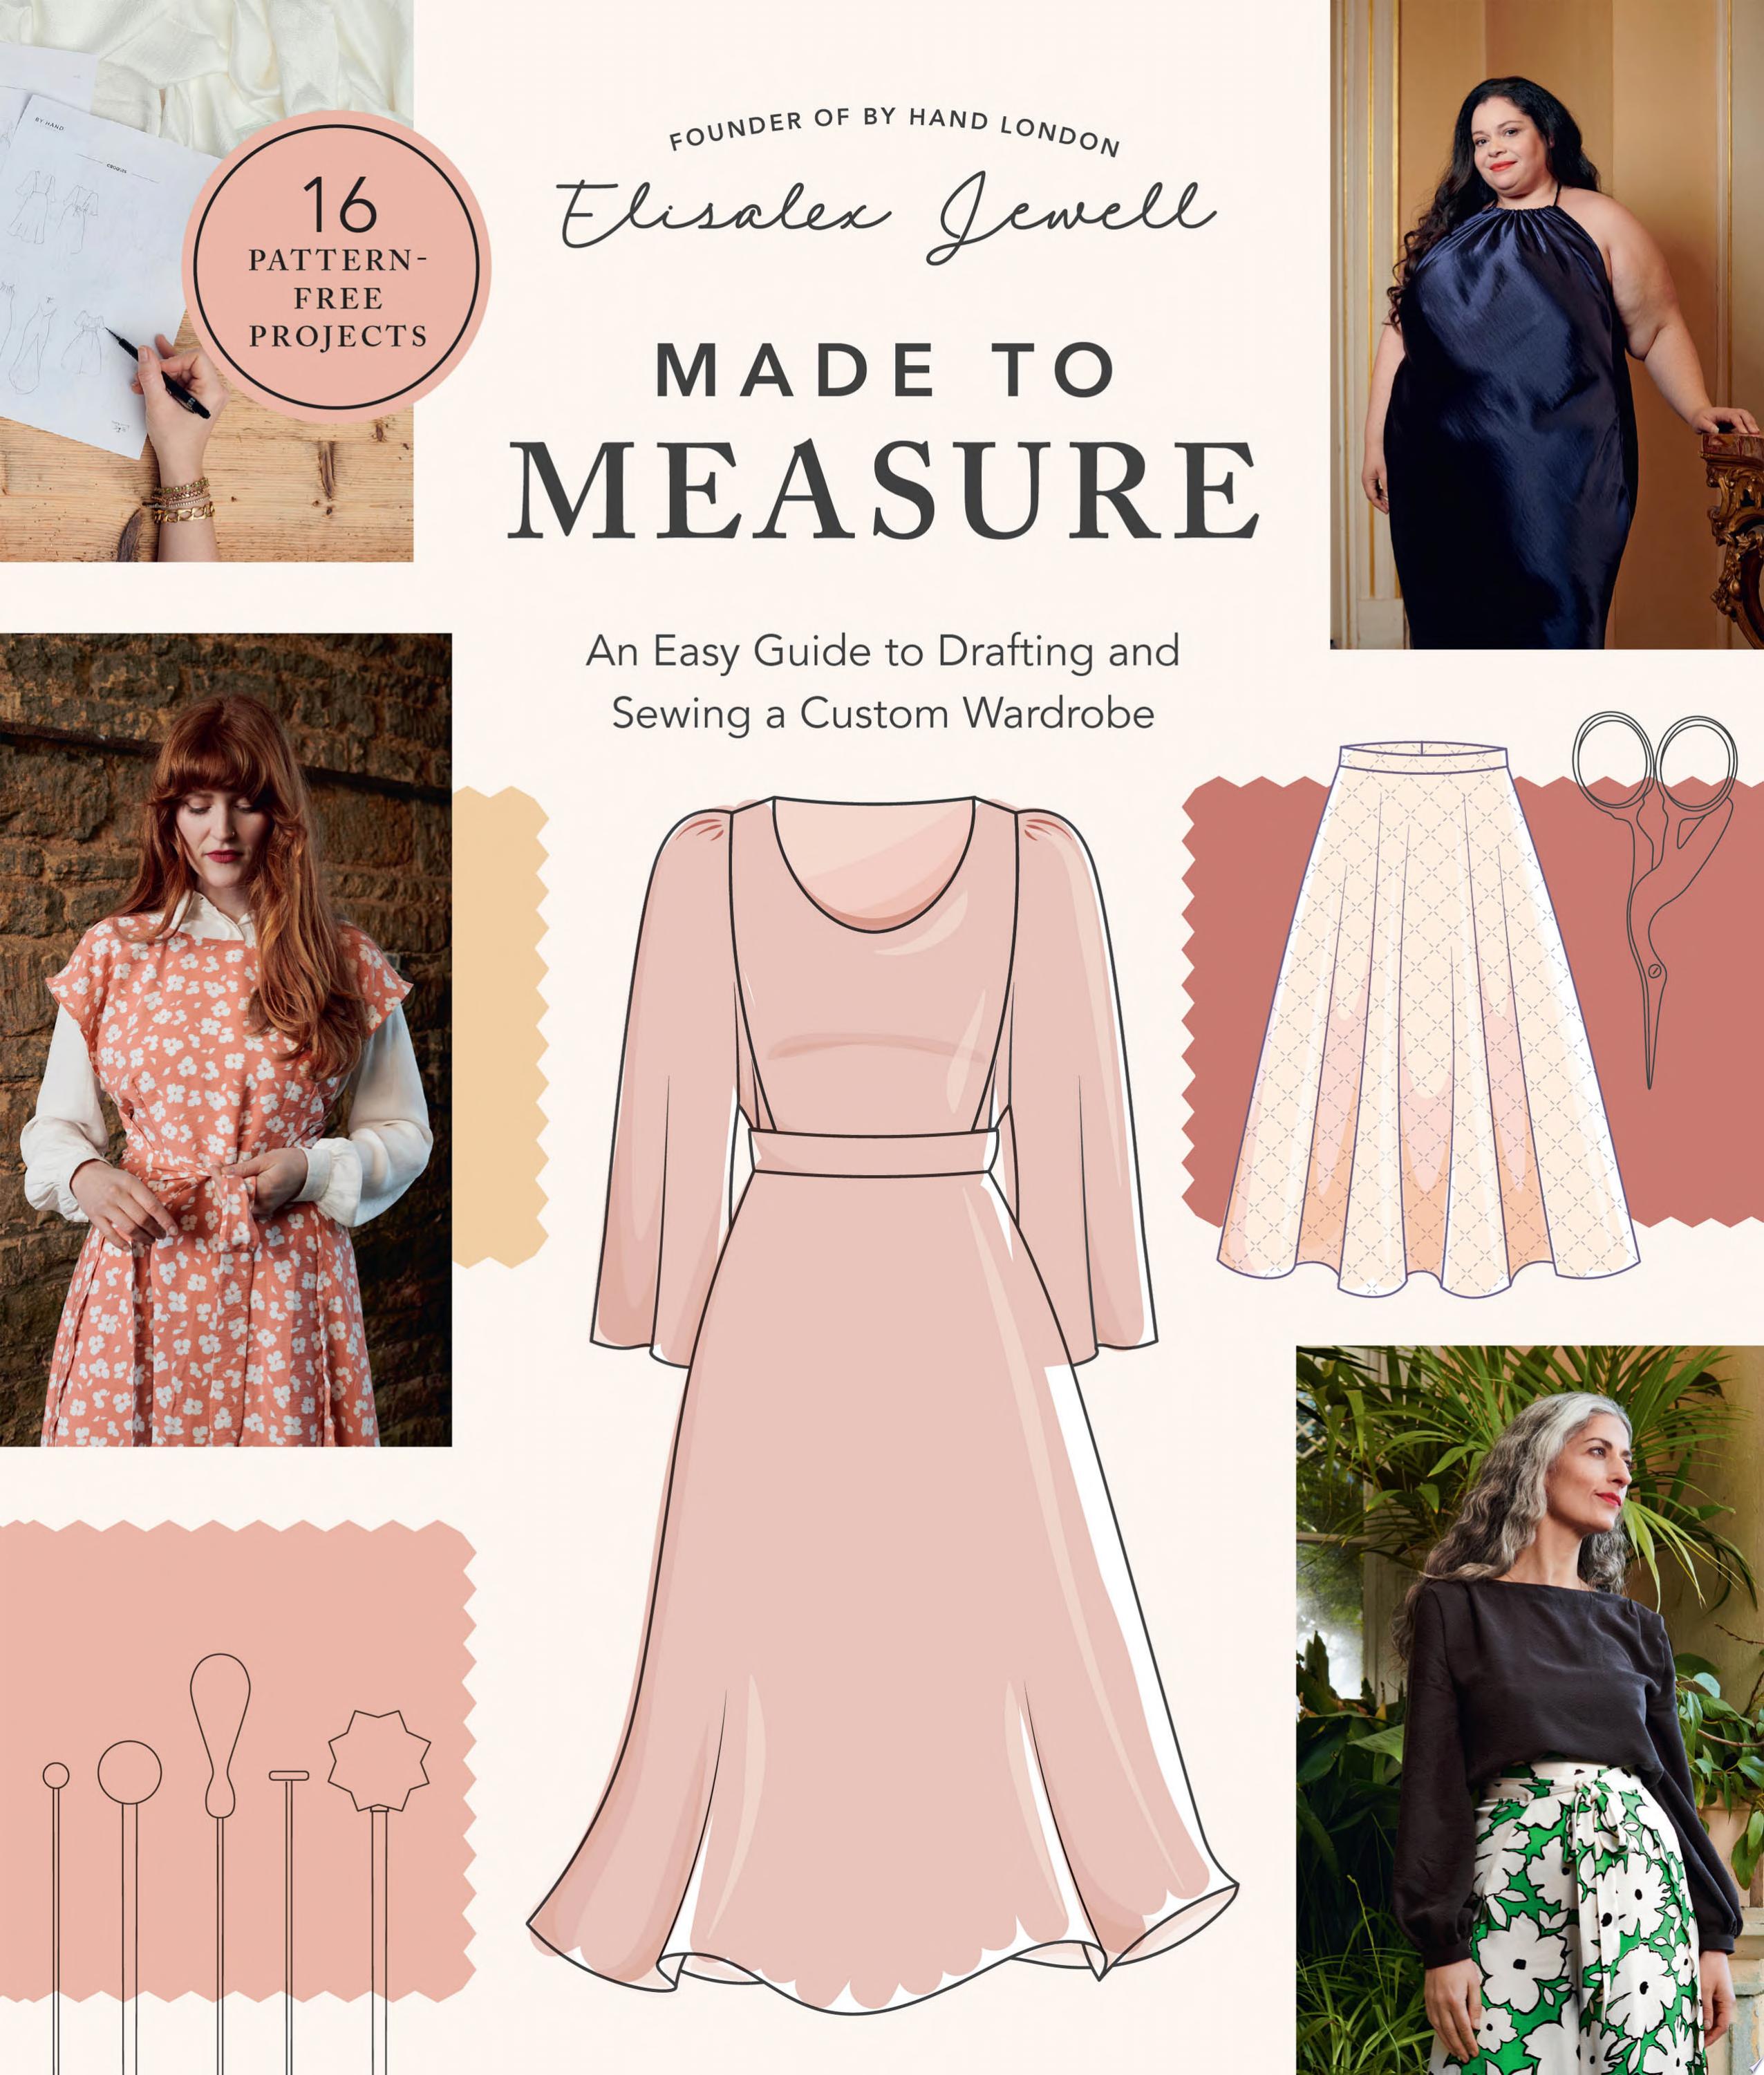 Image for "Made to Measure"